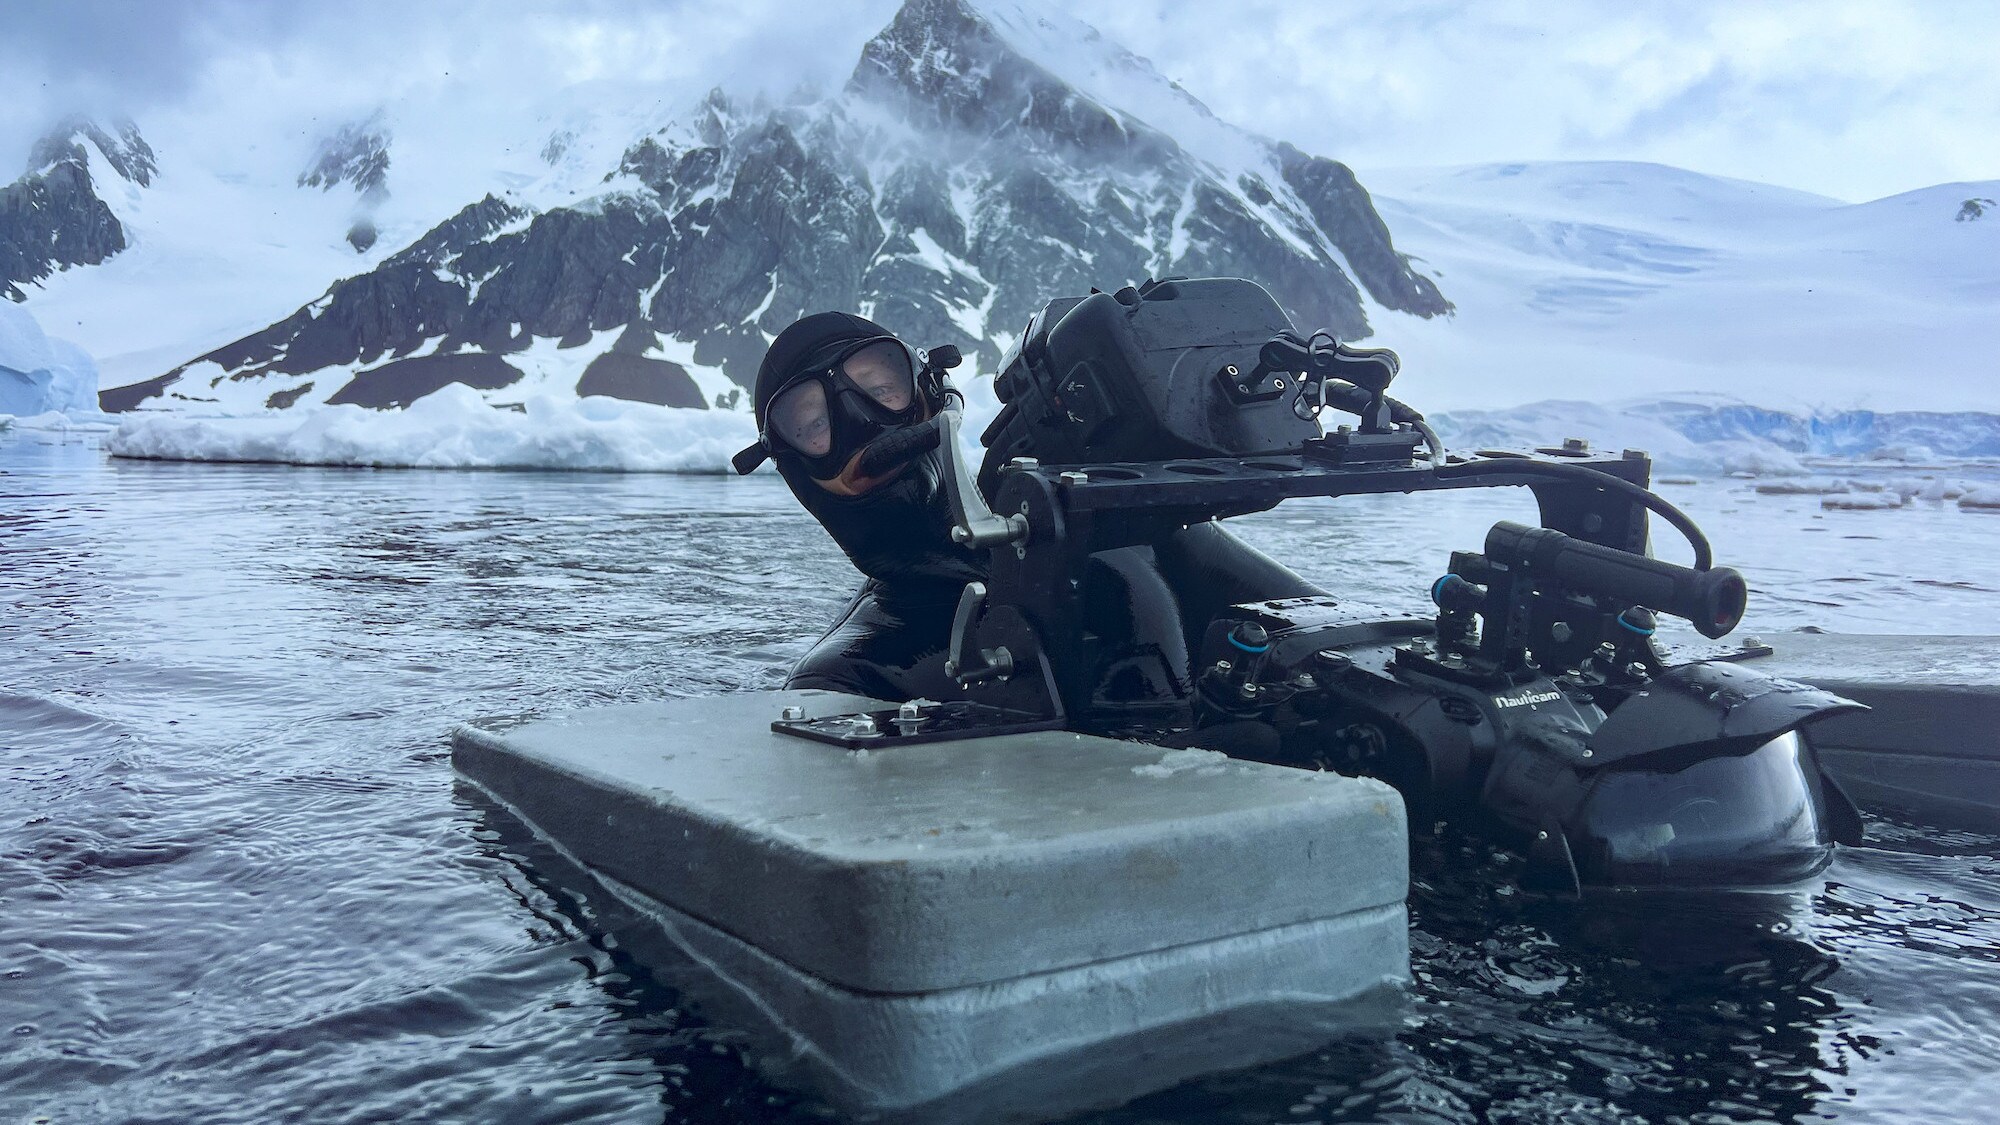 Masked Camera operator on the surface of the water holding a floated camera. (credit: National Geographic for Disney+/Calumn Stronach)